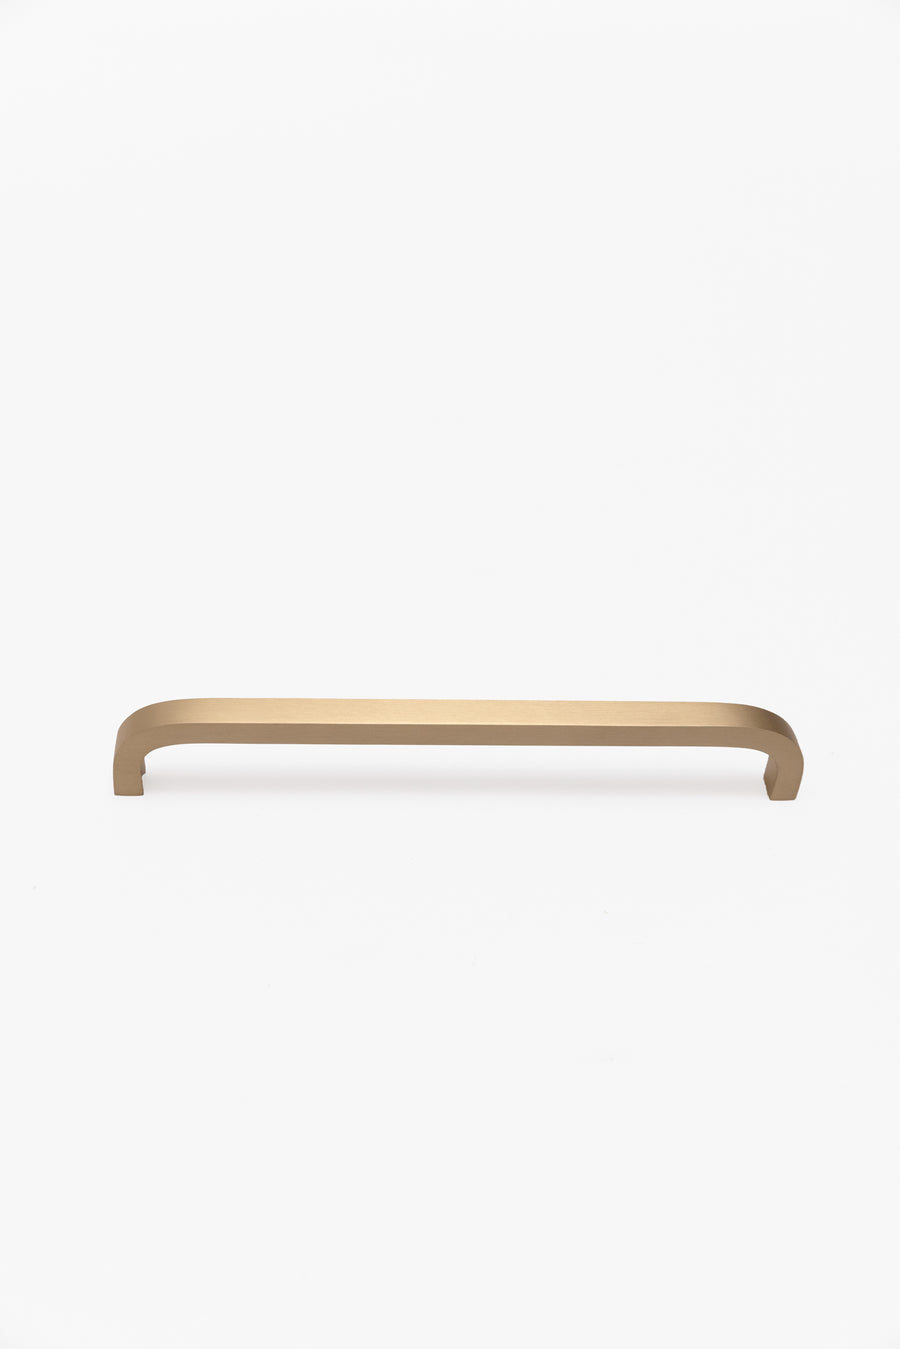 Atticus Brass Cabinetry Handle - Little Swagger